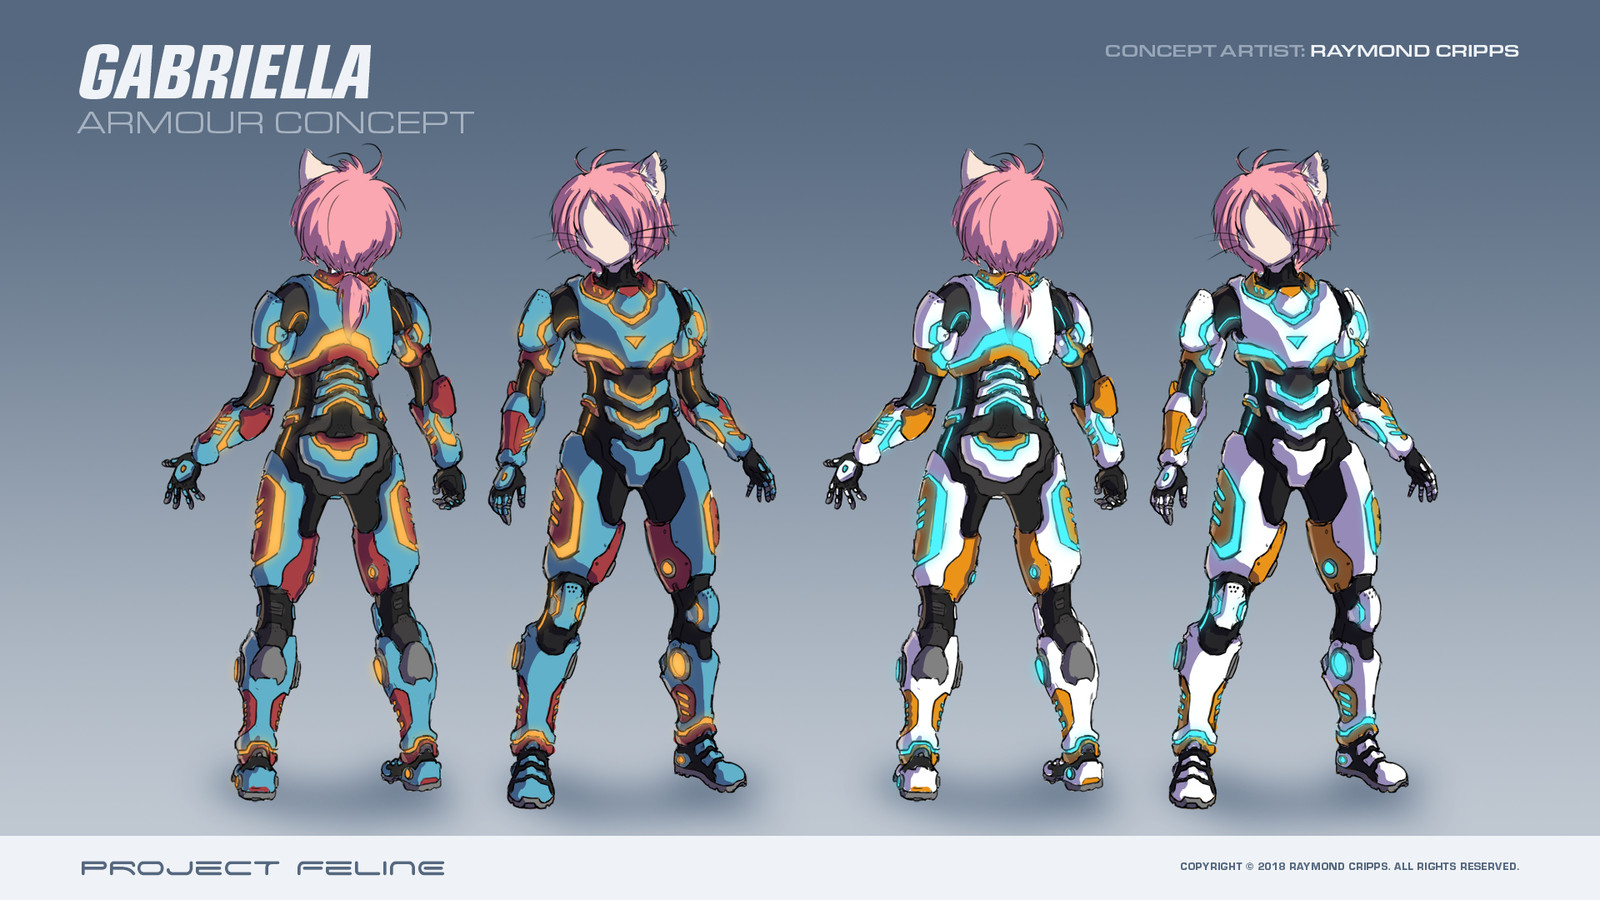 Initial concept for the amour the protagonist is to wear.